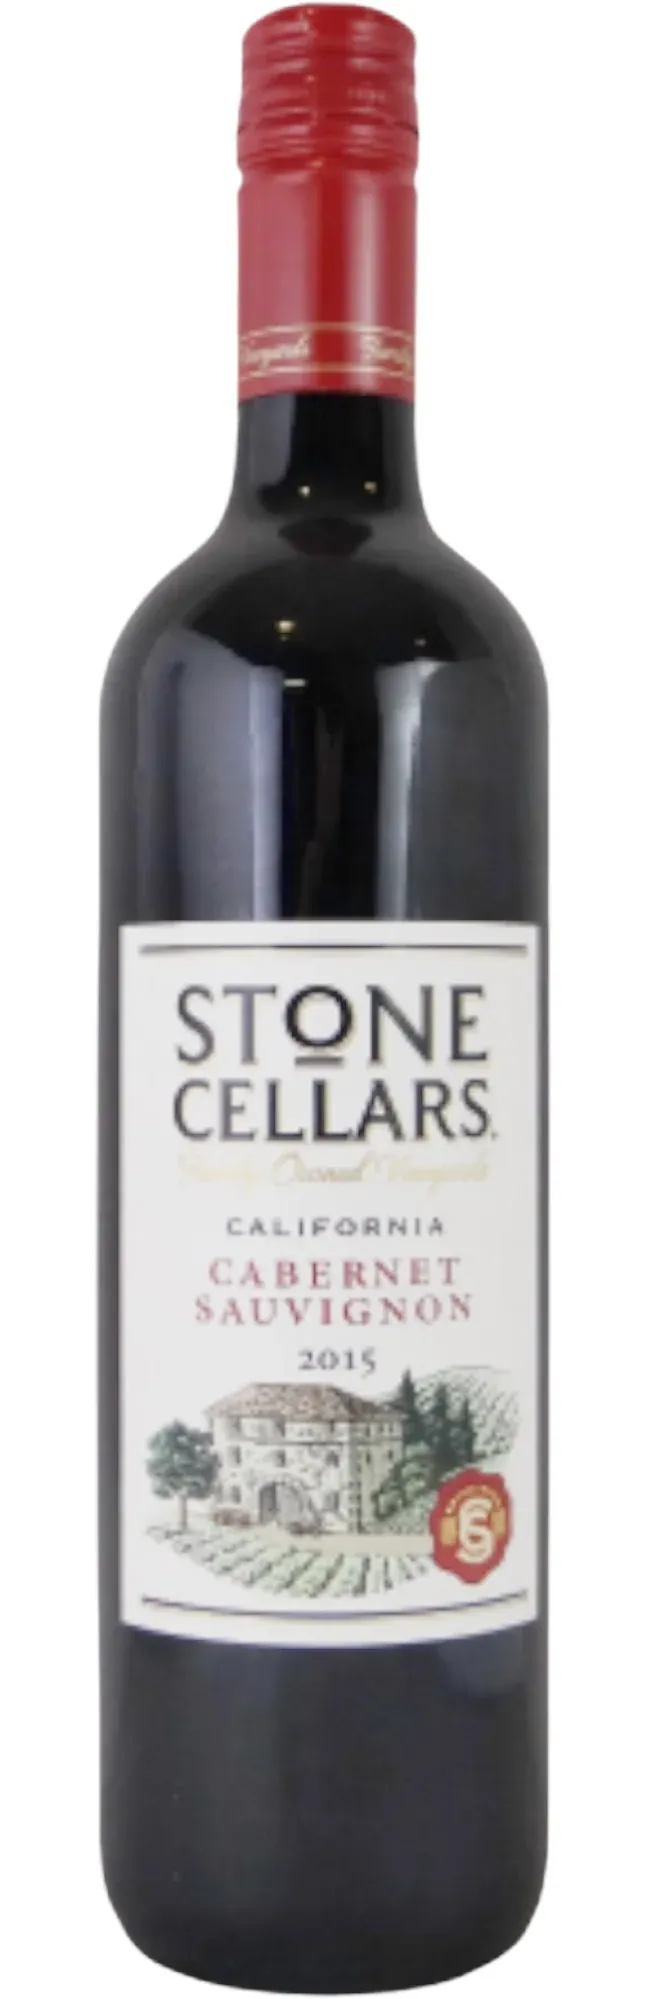 Bottle of One Stone Cellars Cabernet Sauvignon from search results